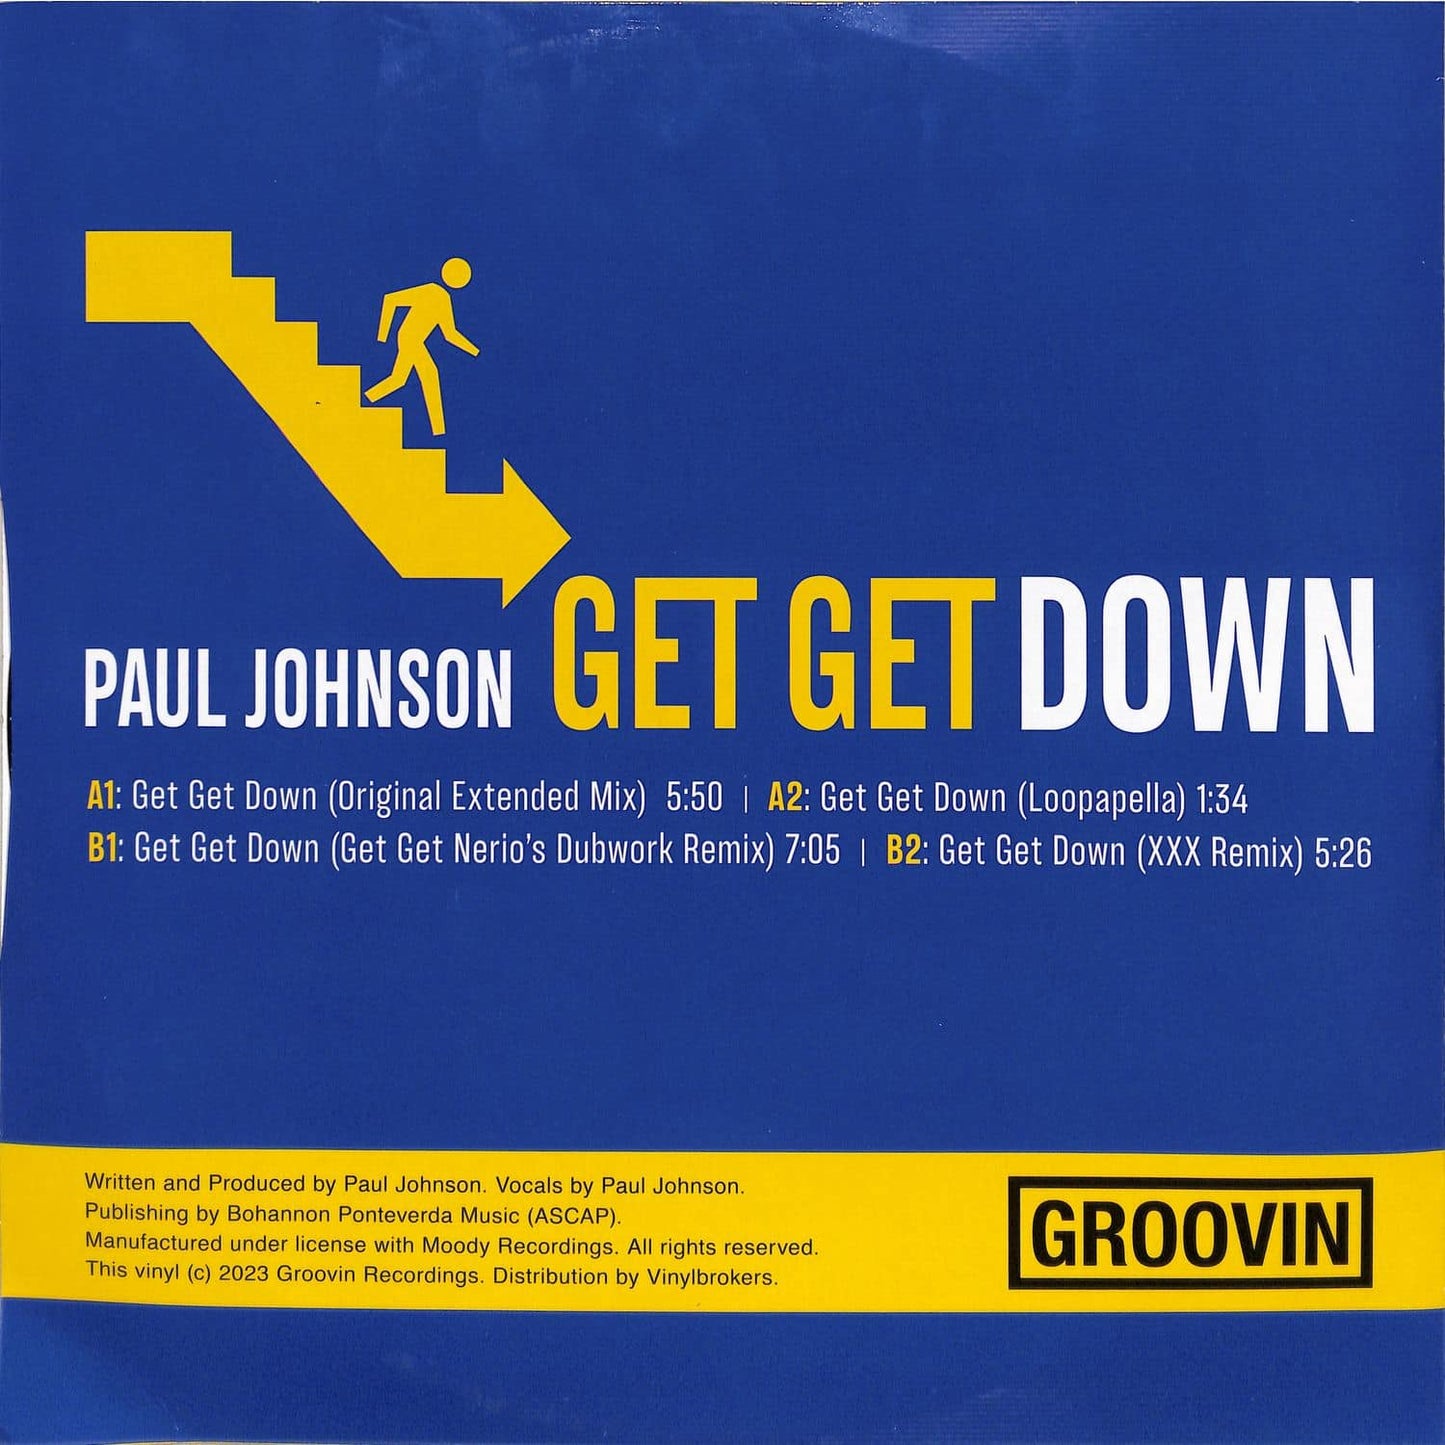 Paul Johnson - Get Get Down [Groovin Italy]